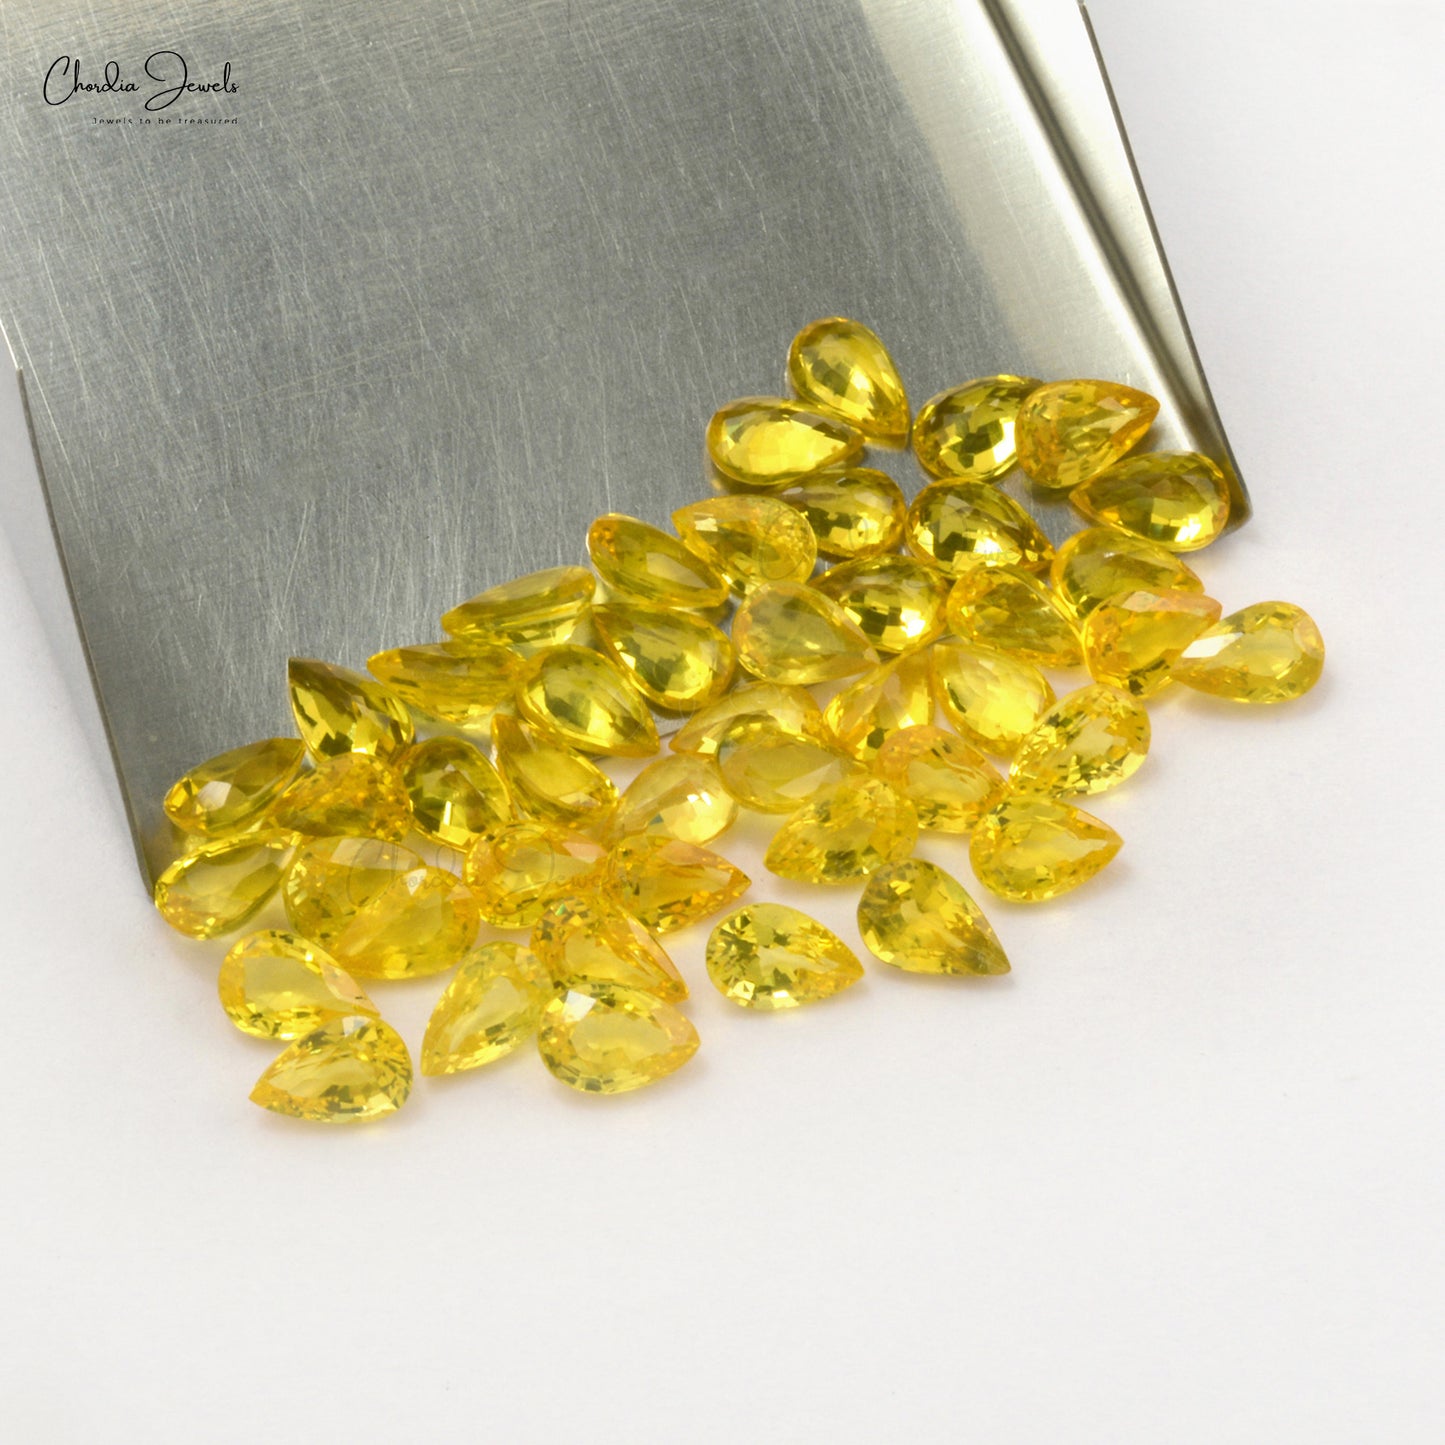 5x3mm NATURAL YELLOW SAPPHIRE PEAR-CUT PRECIOUS GEMSTONES. Weight: 0.27 Carats, Stone Cut: Excellent, Quality: AAA Grade from Chordia Jewels  